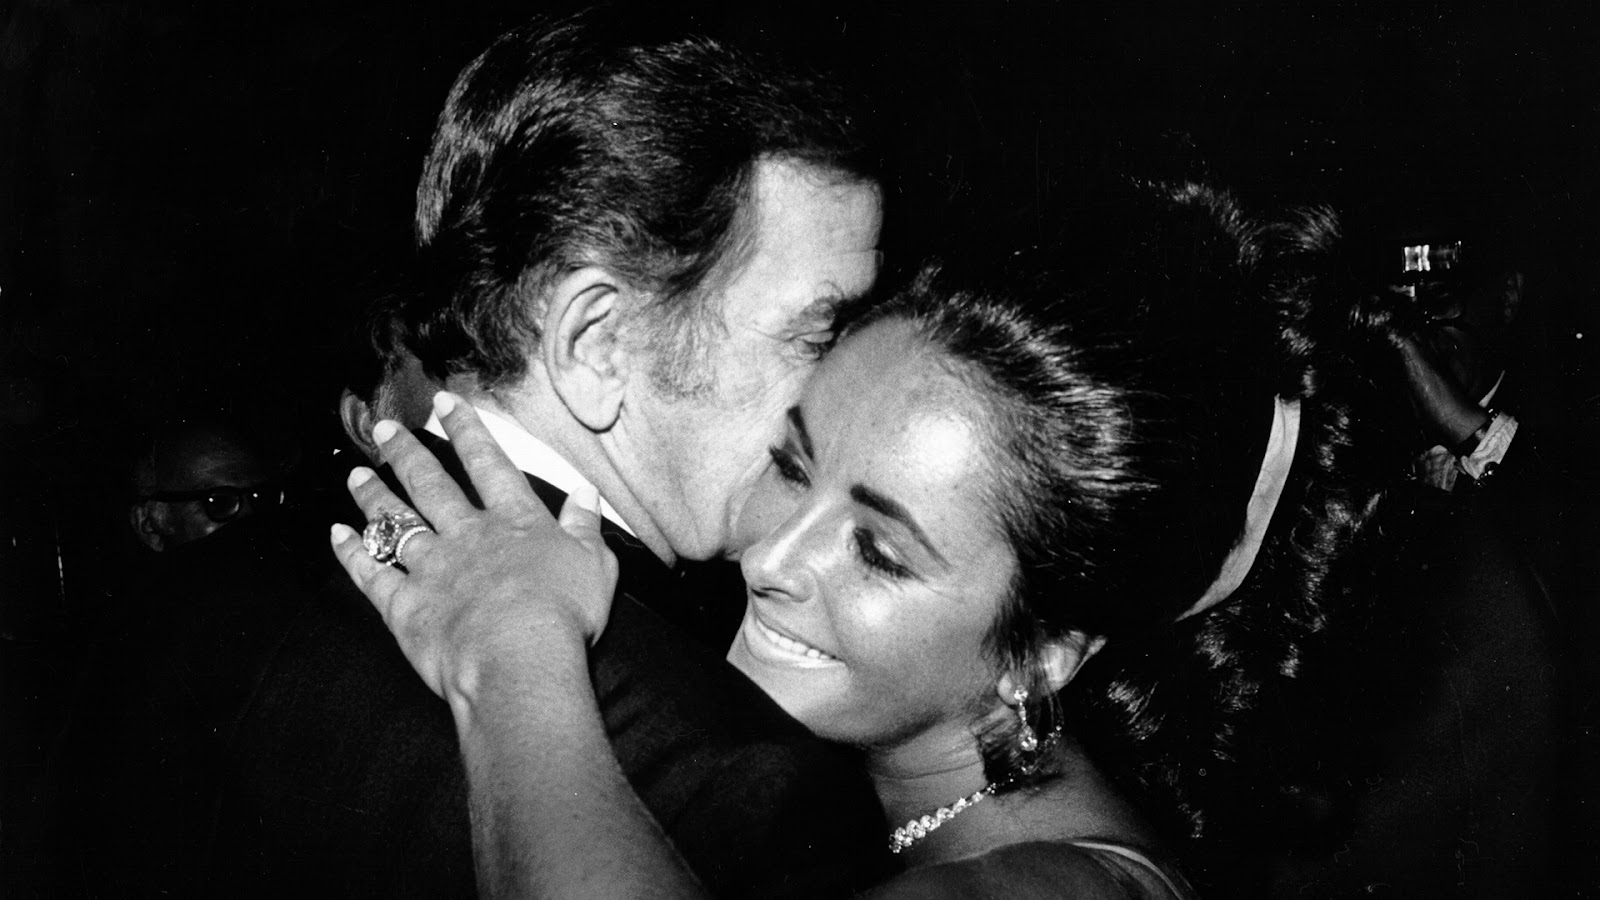 October 10, 1975: Elizabeth Taylor and Richard Burton Secretly Remarried in Africa, Only Sixteen Months After Getting Divorced - Lifetime